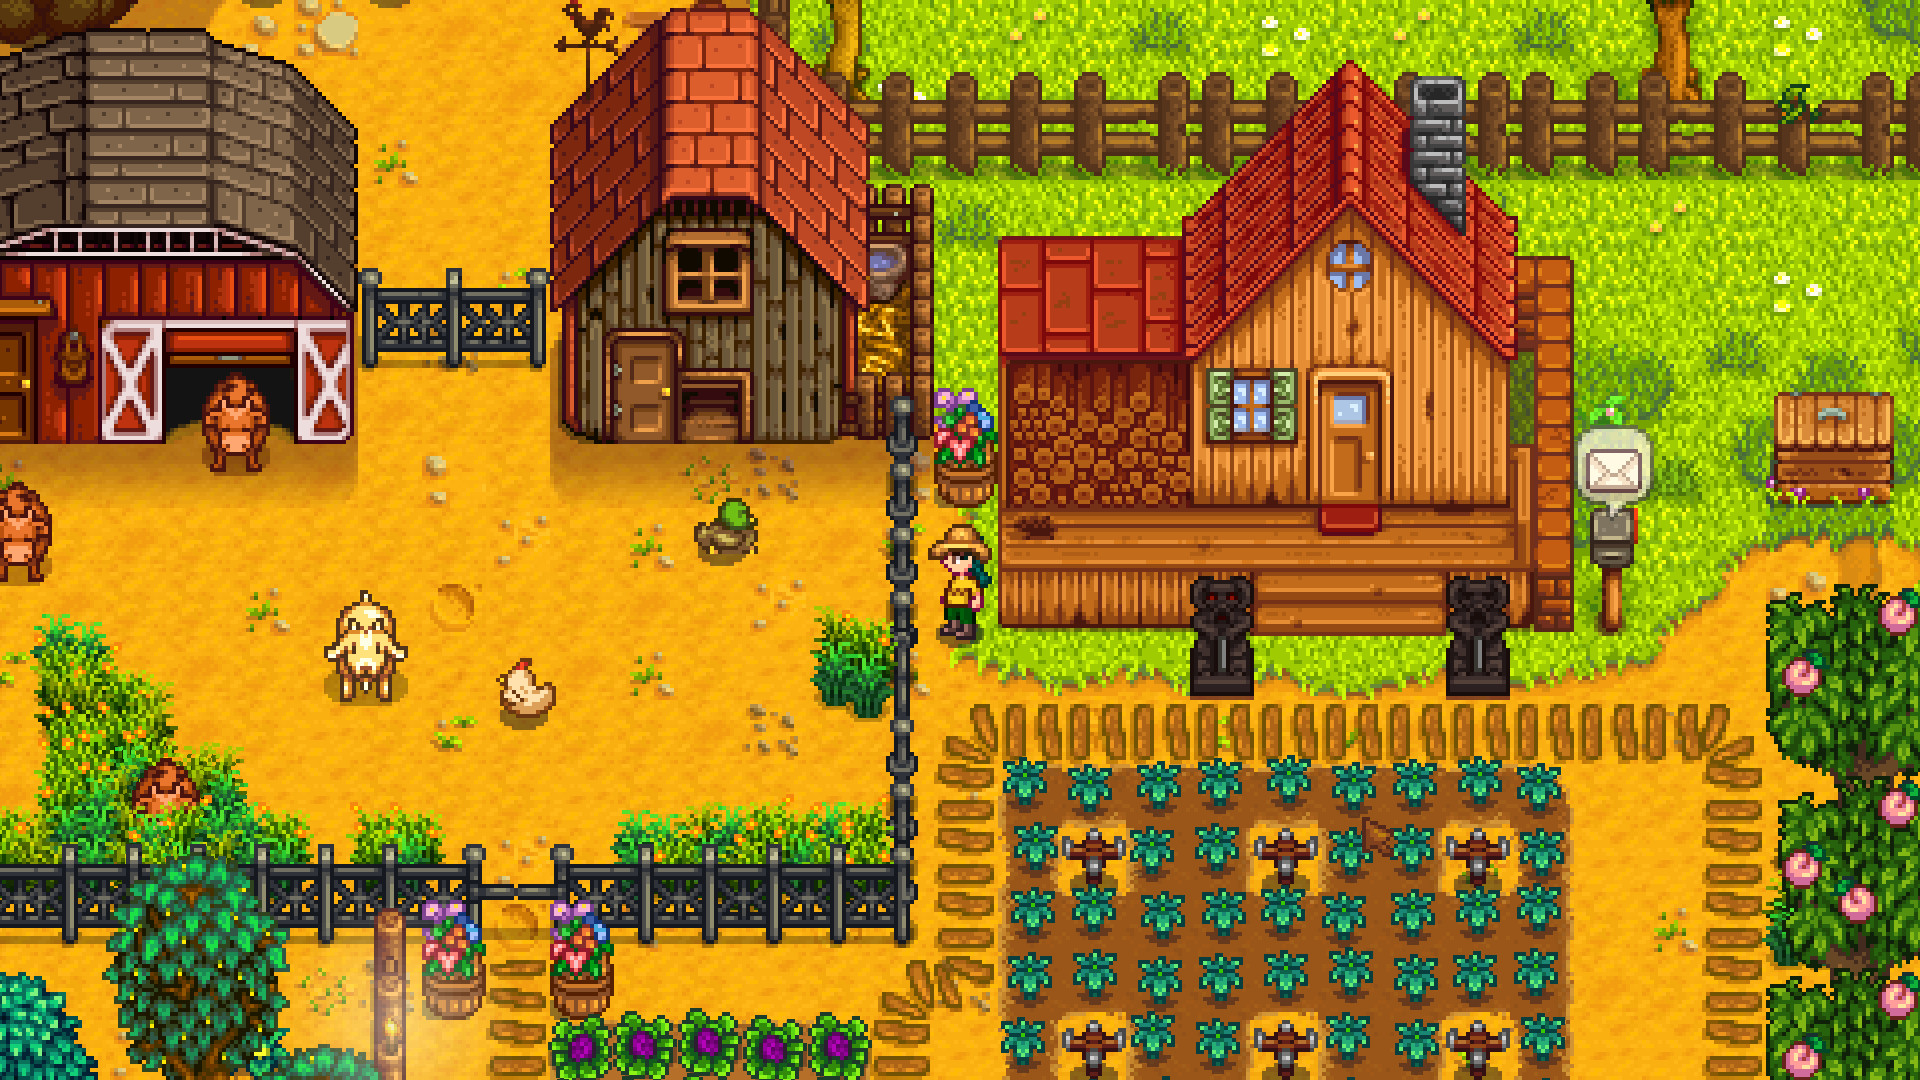 Find the best laptops for Stardew Valley